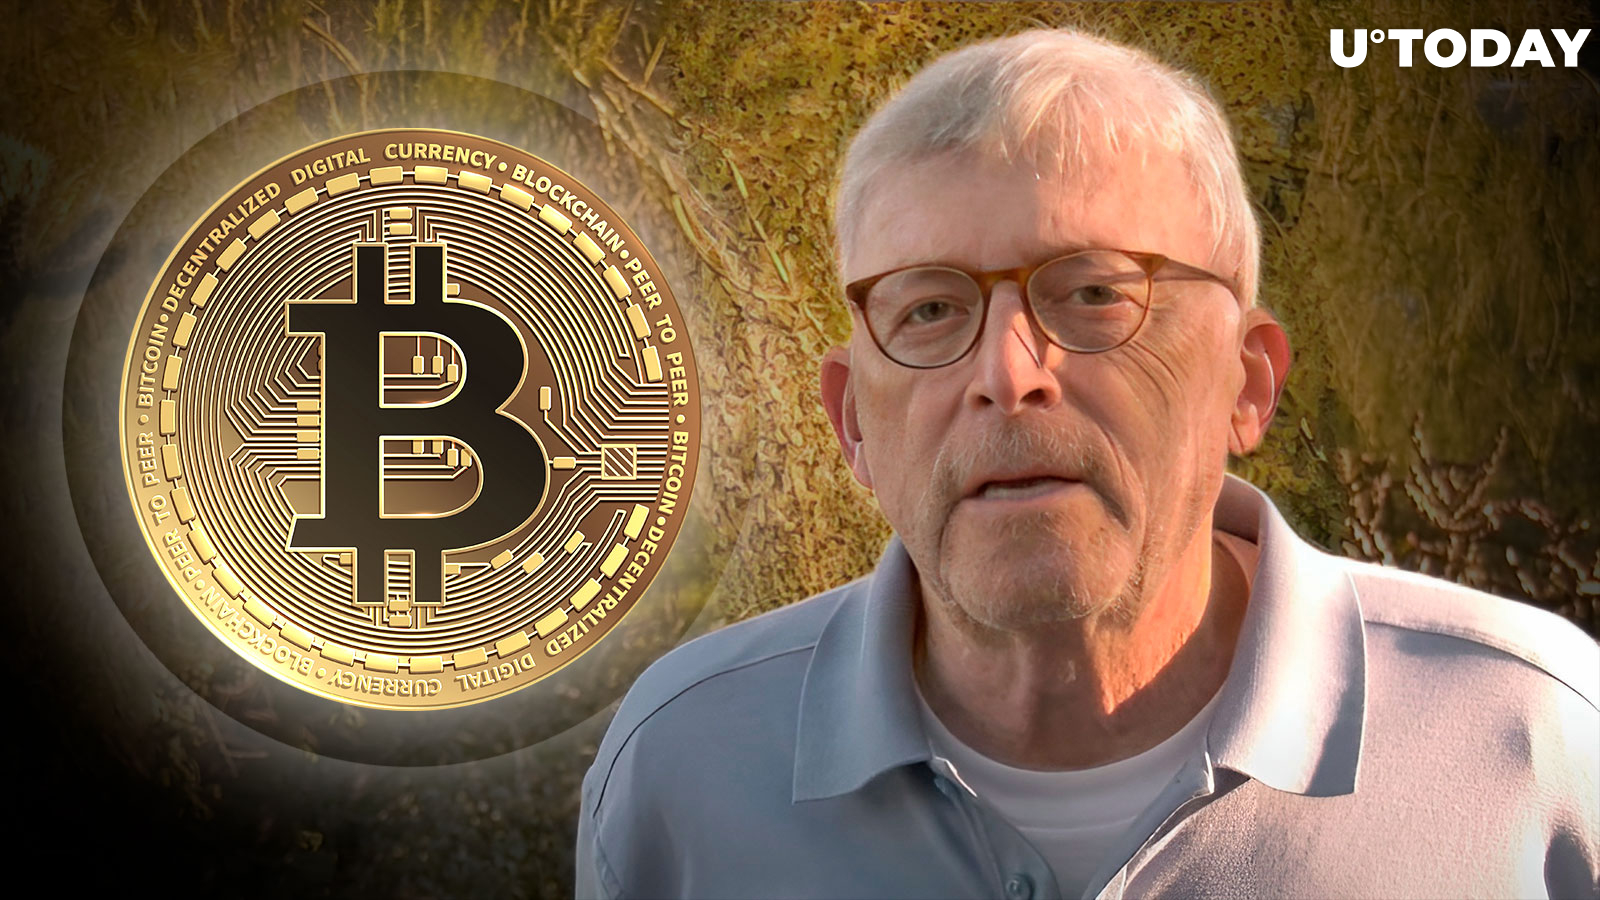 Bitcoin Overcrowded? Peter Brandt's Explosive Take on BTC Price